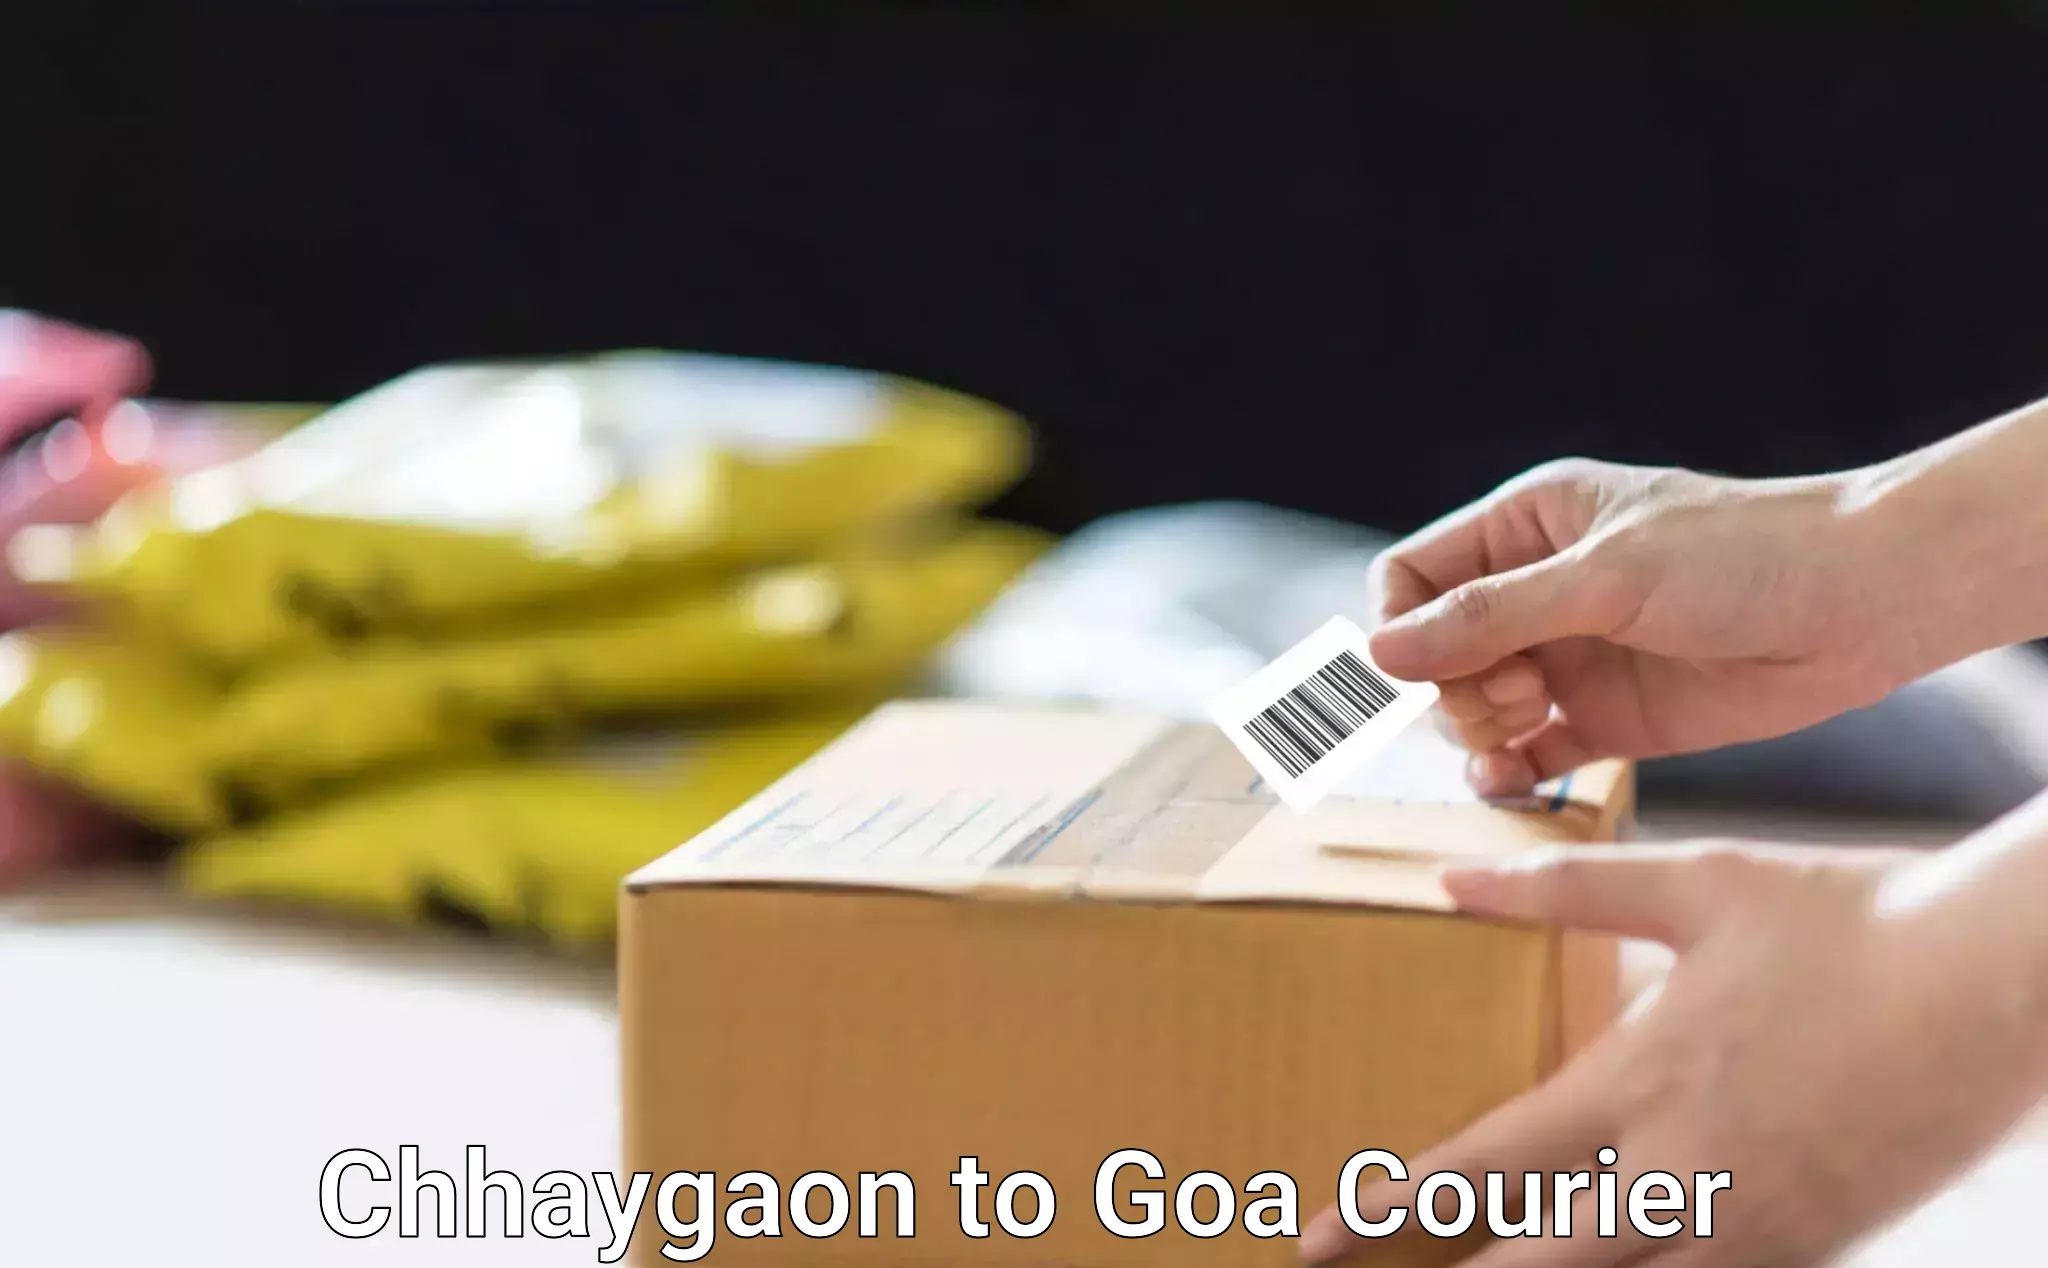 Courier service efficiency Chhaygaon to Ponda